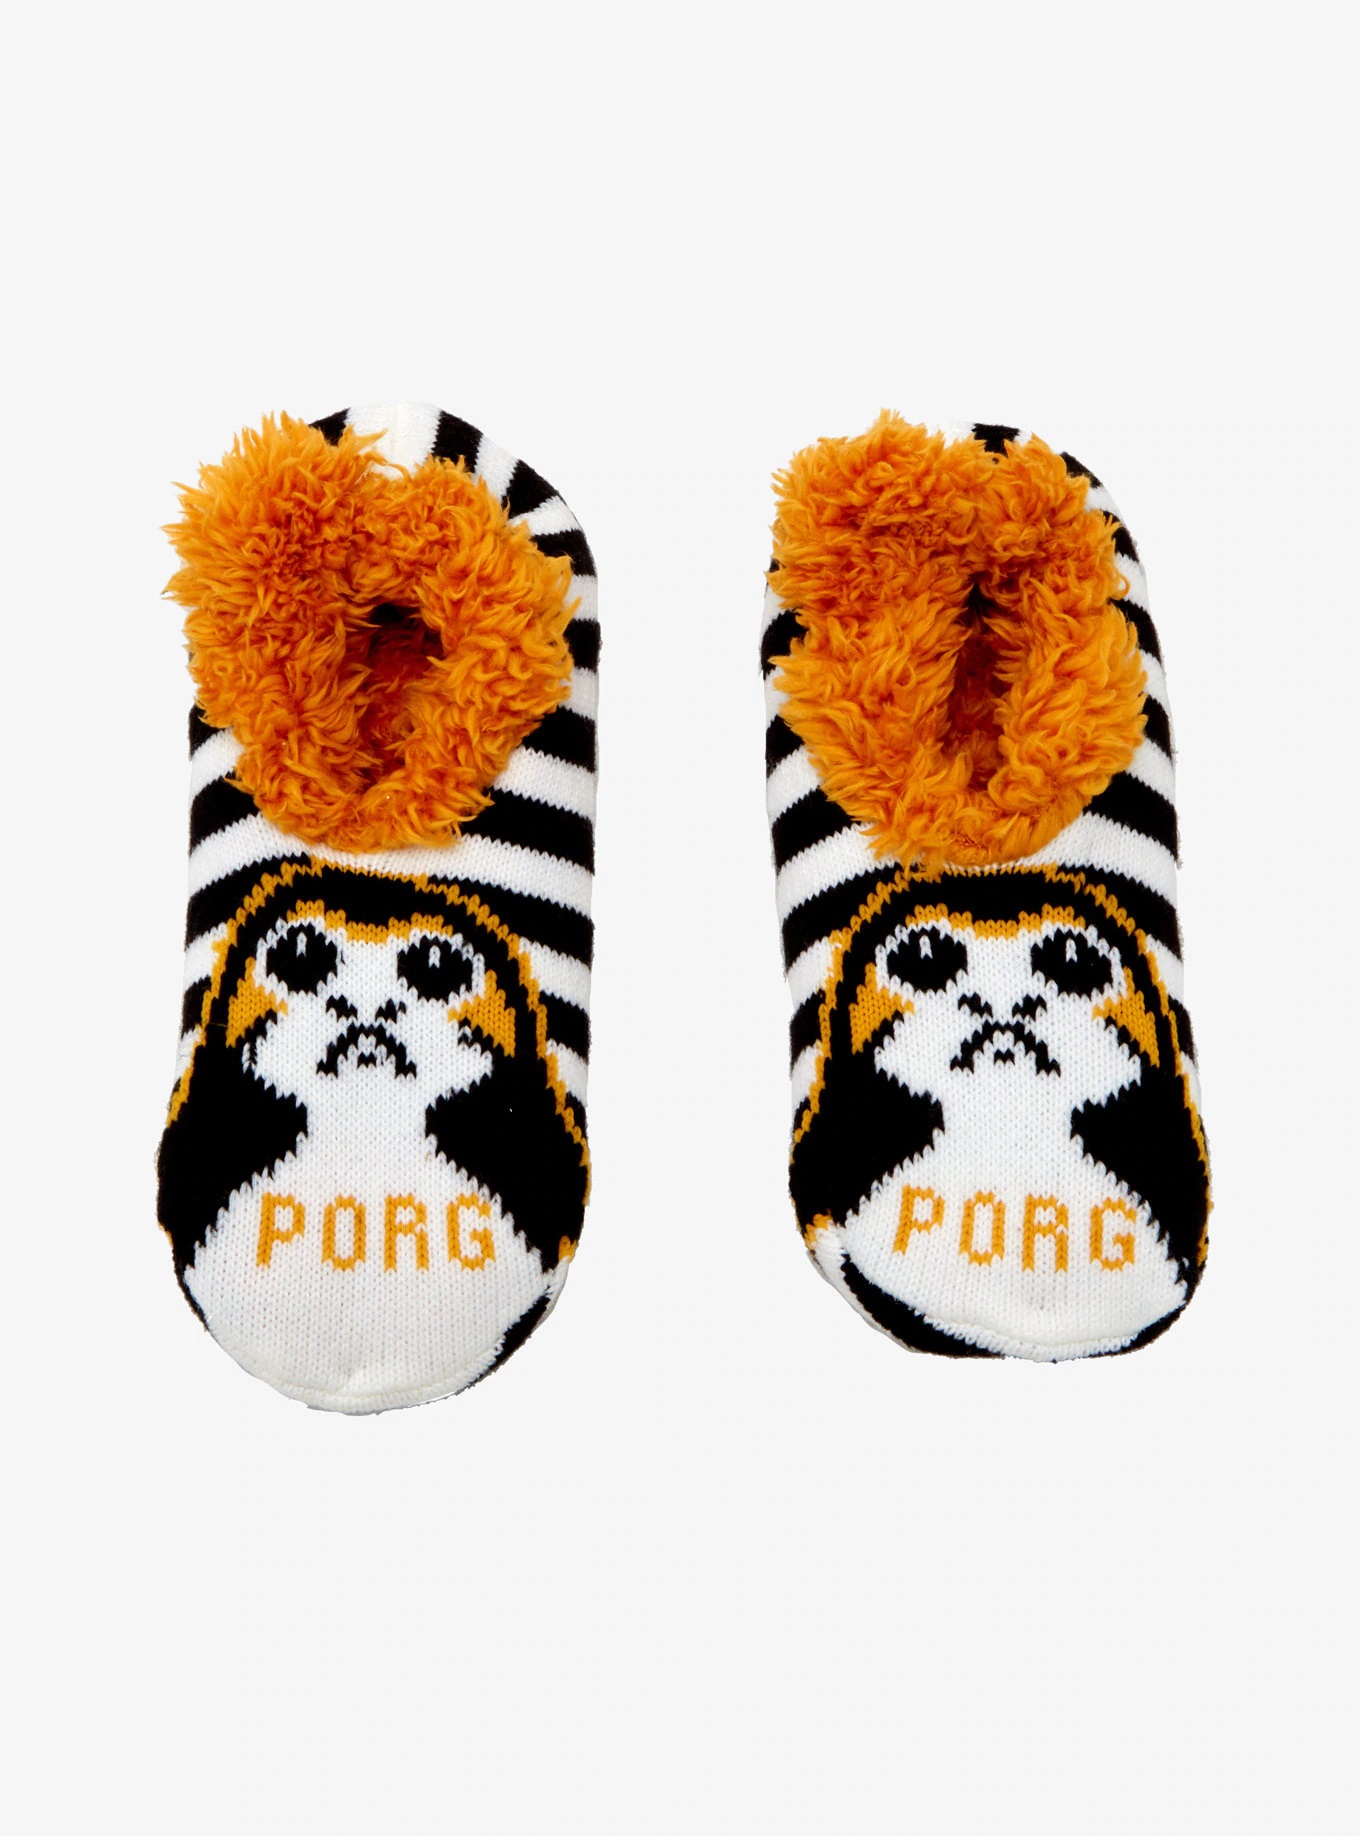 Star Wars Porg Knit Slippers at Hot Topic